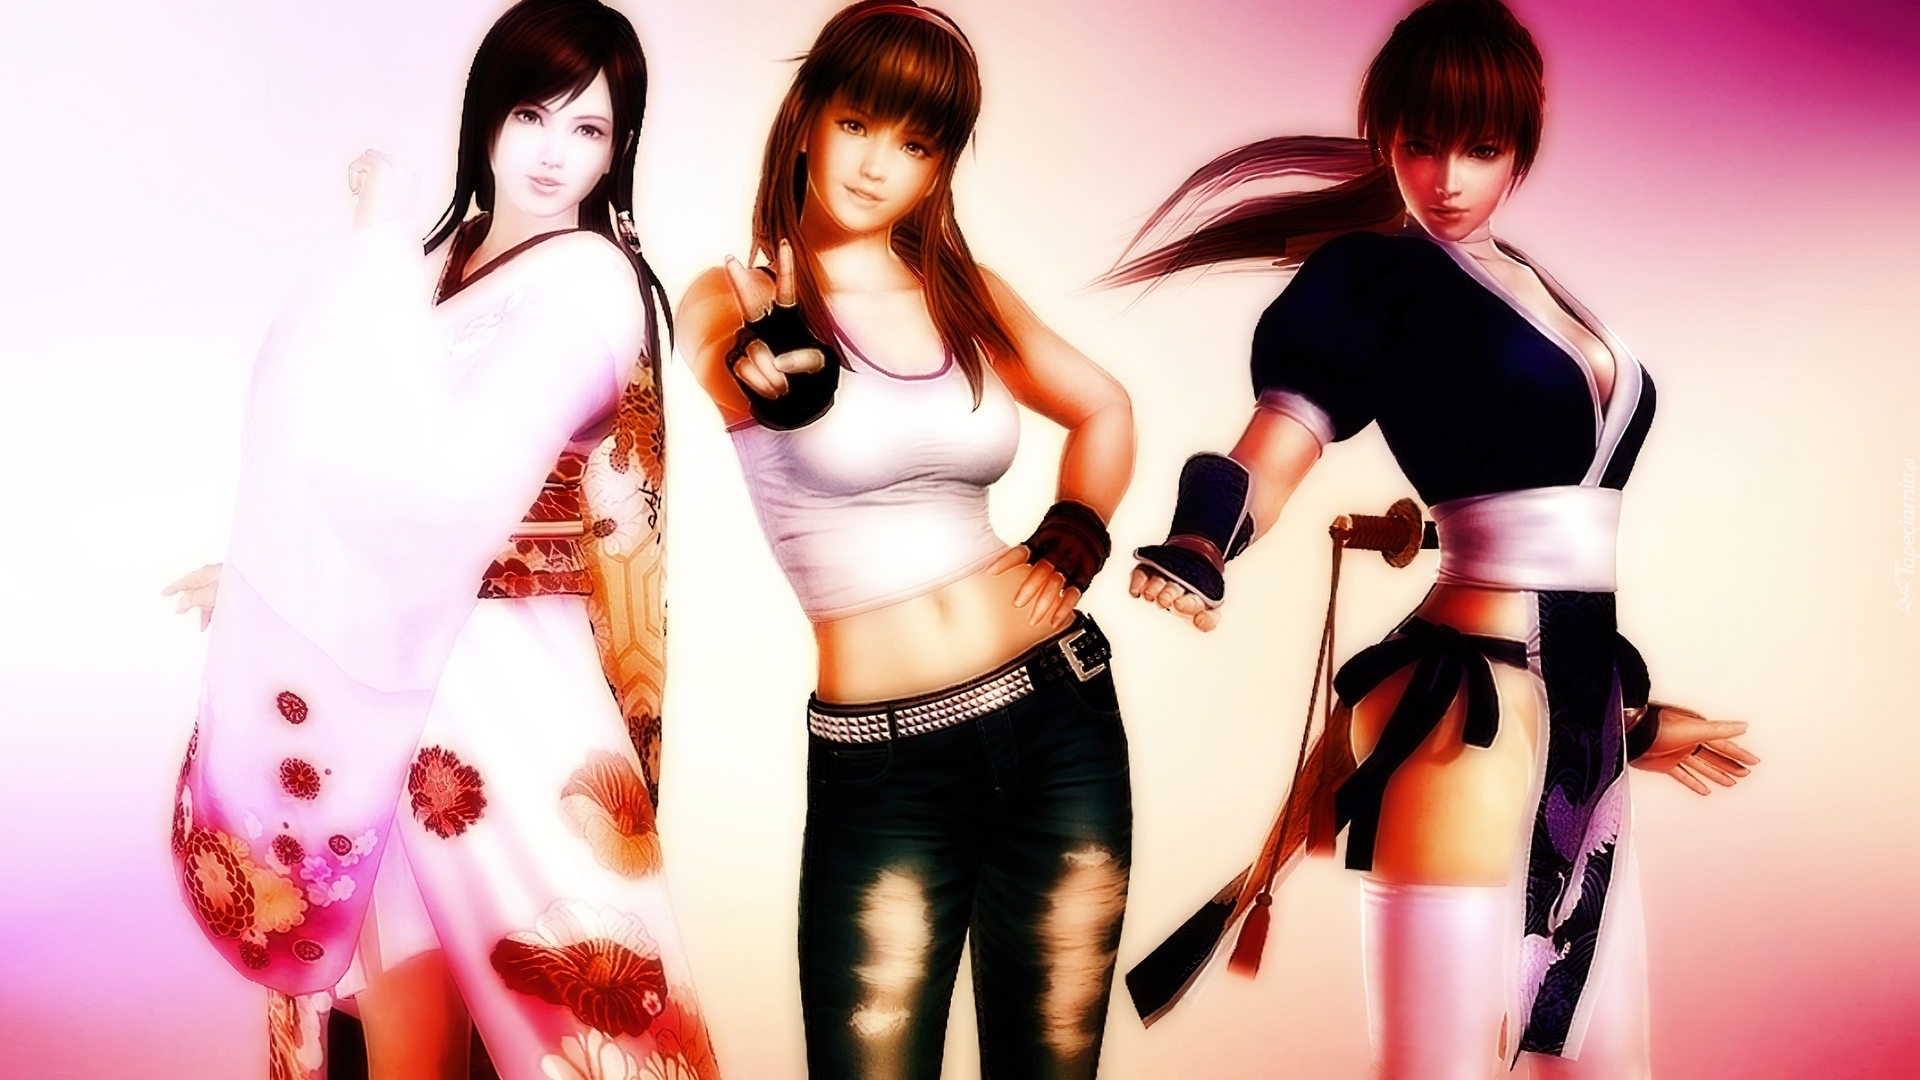 Dog or alive демо. Хитоми Dead or Alive. Хитоми Dead or Alive 5. Dead or Alive Кокоро. Dead or Alive 5 Hitomi.